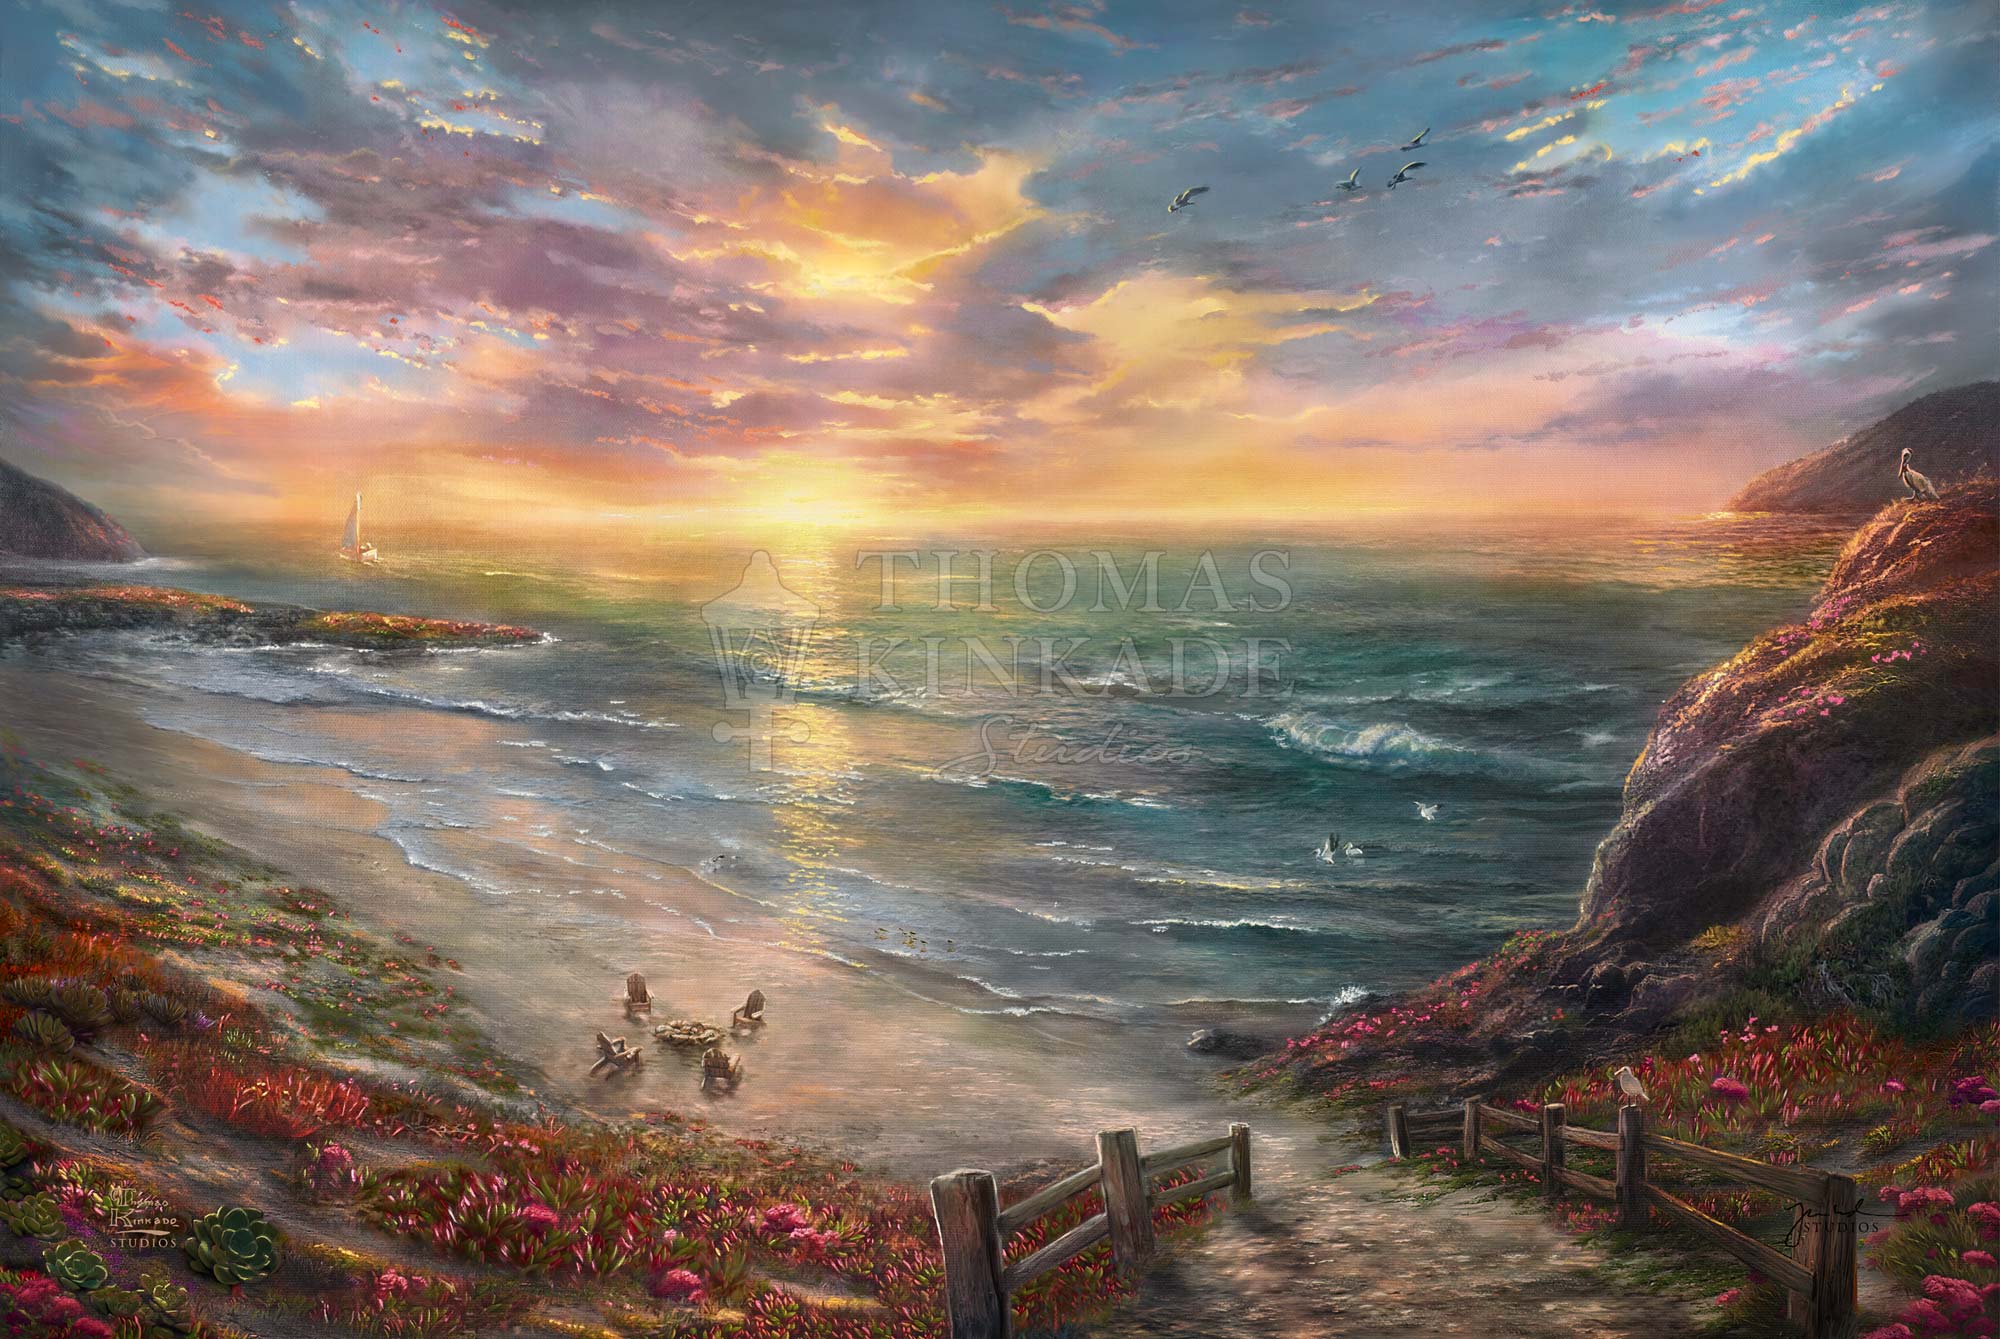 Beachside Gathering - Limited Edition Canvas